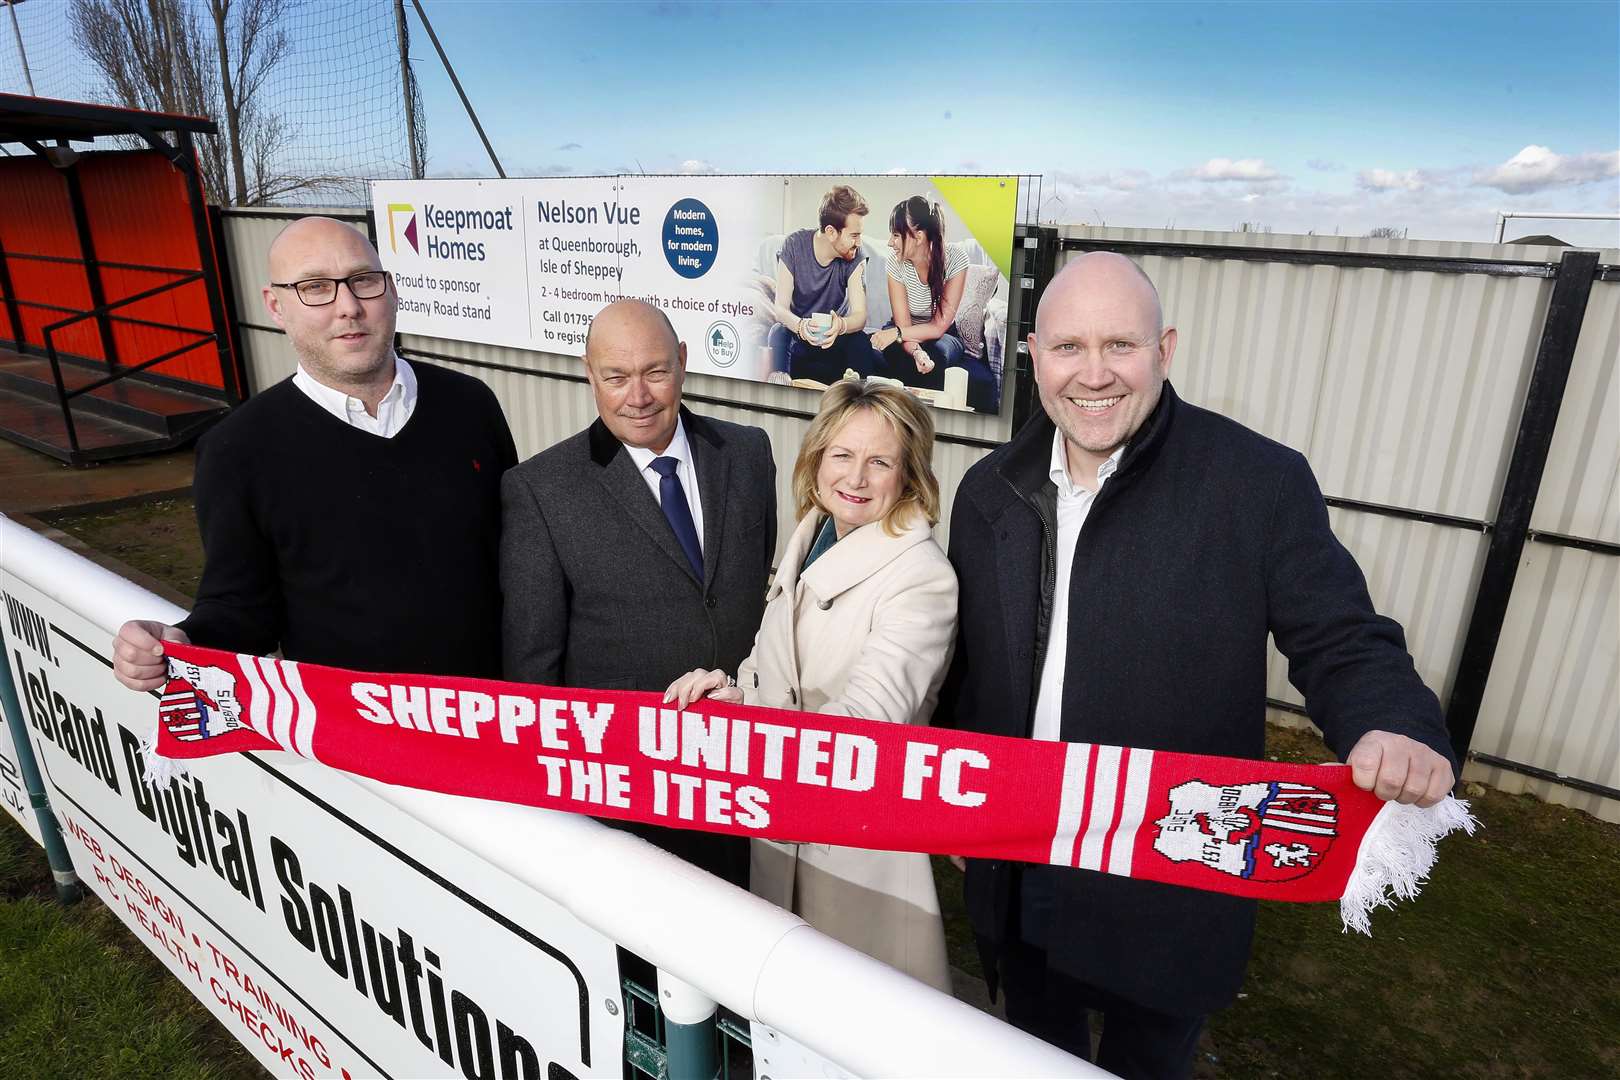 Matthew Smith, Chairman, Sheppey United FC; Lee Havill, Havill Funeral Services and Sheppey United's main sponsor; Janet Plant, Head of Sales, Keepmoat Homes and Paul Rogers, Commercial Director, Sheppey United FC. (24078081)